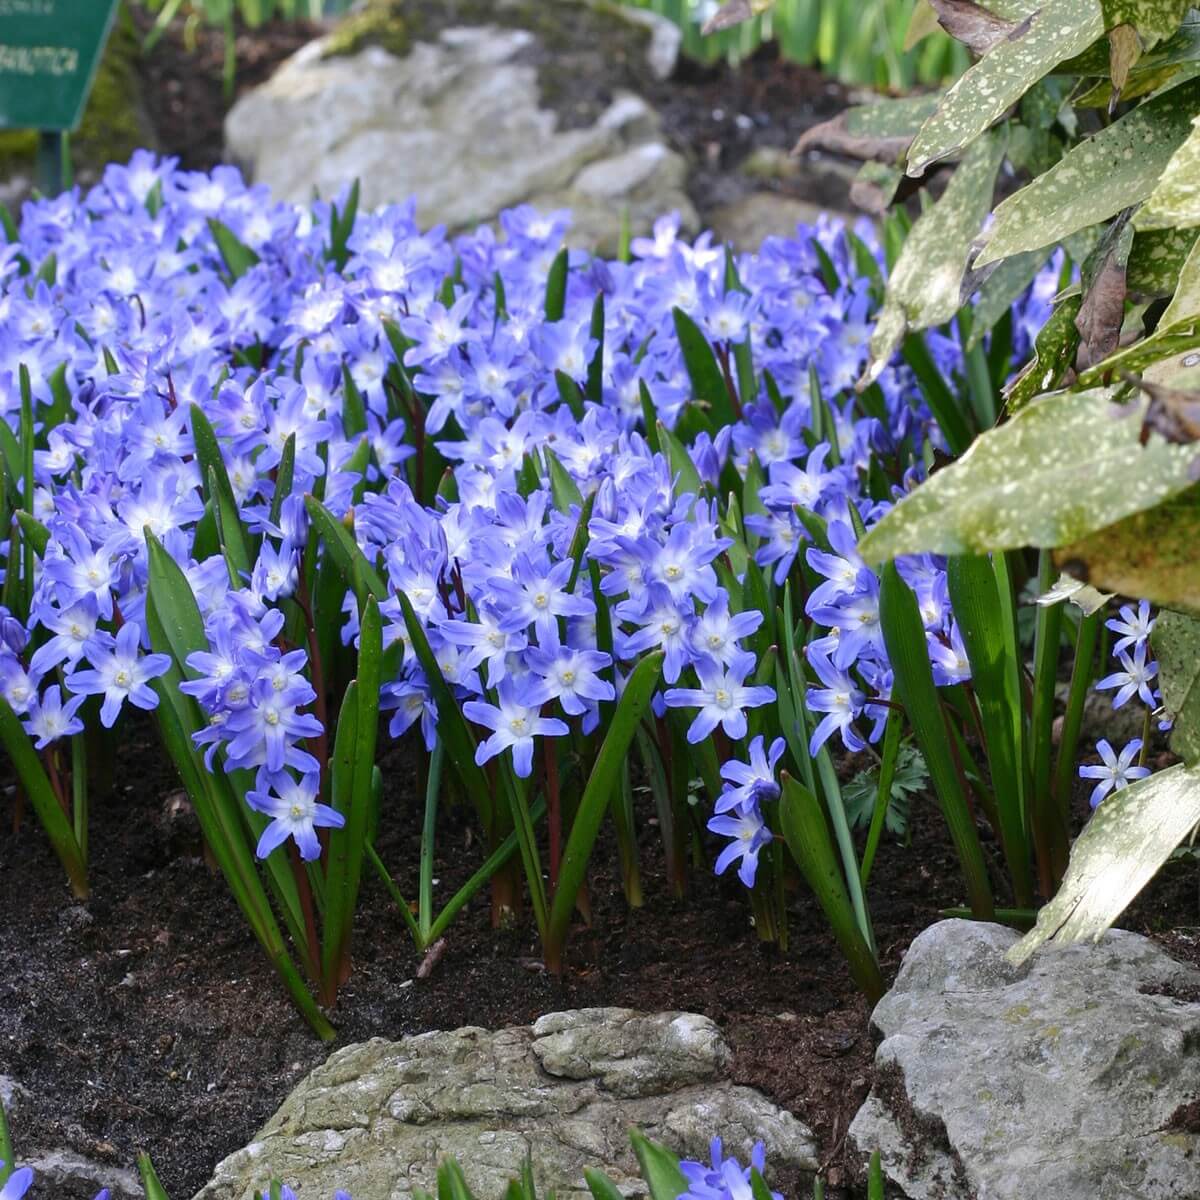 Chionodoxa | Perennial Flowers All Season: Perennial Garden Design Guide for Blooms in Spring Summer and Fall